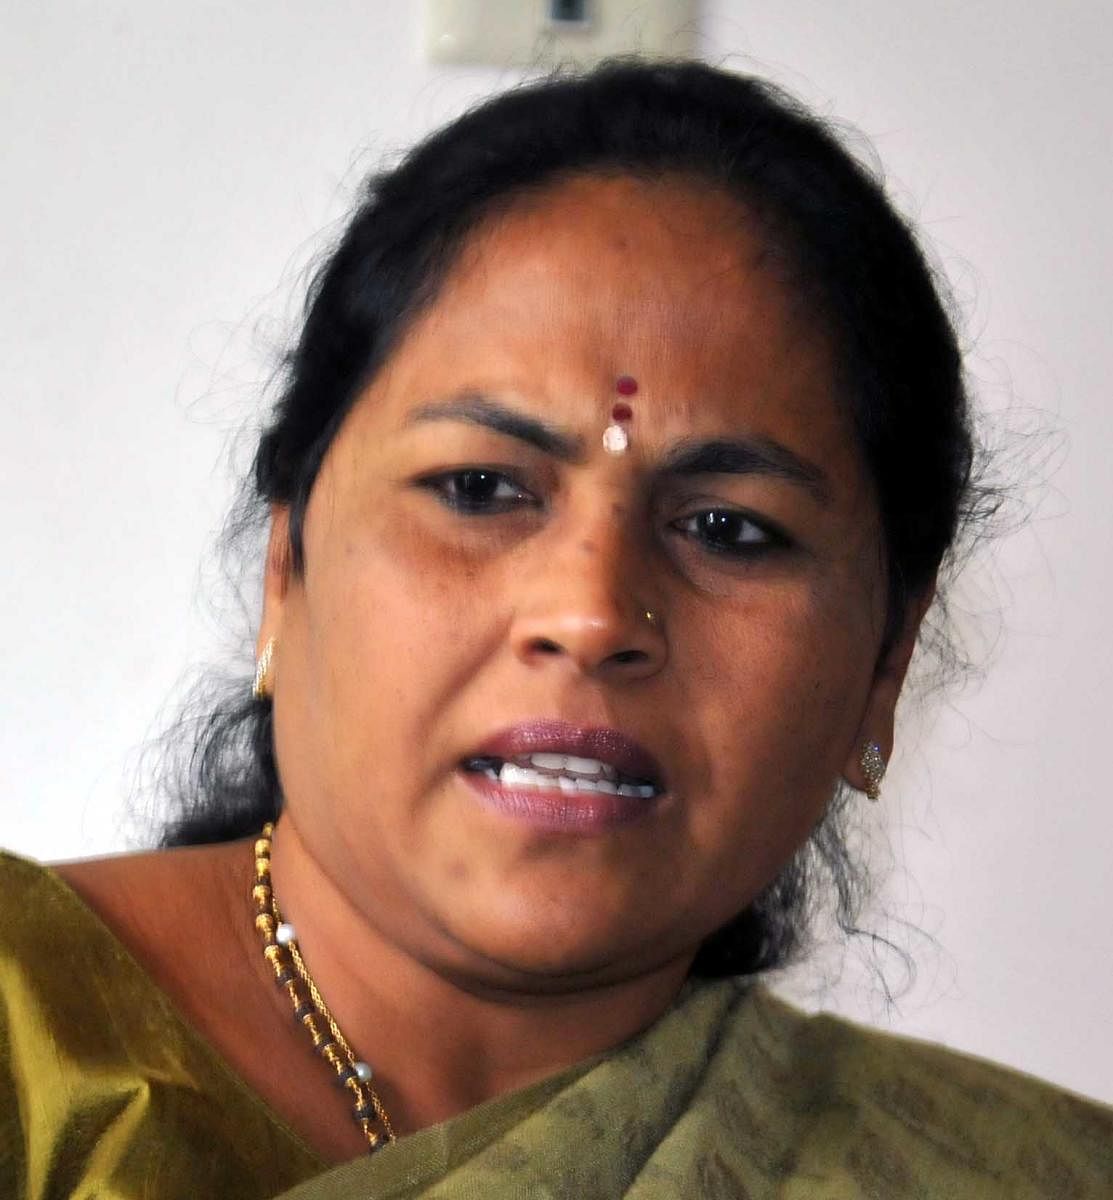 Bring out truth in phone tapping case: Shobha